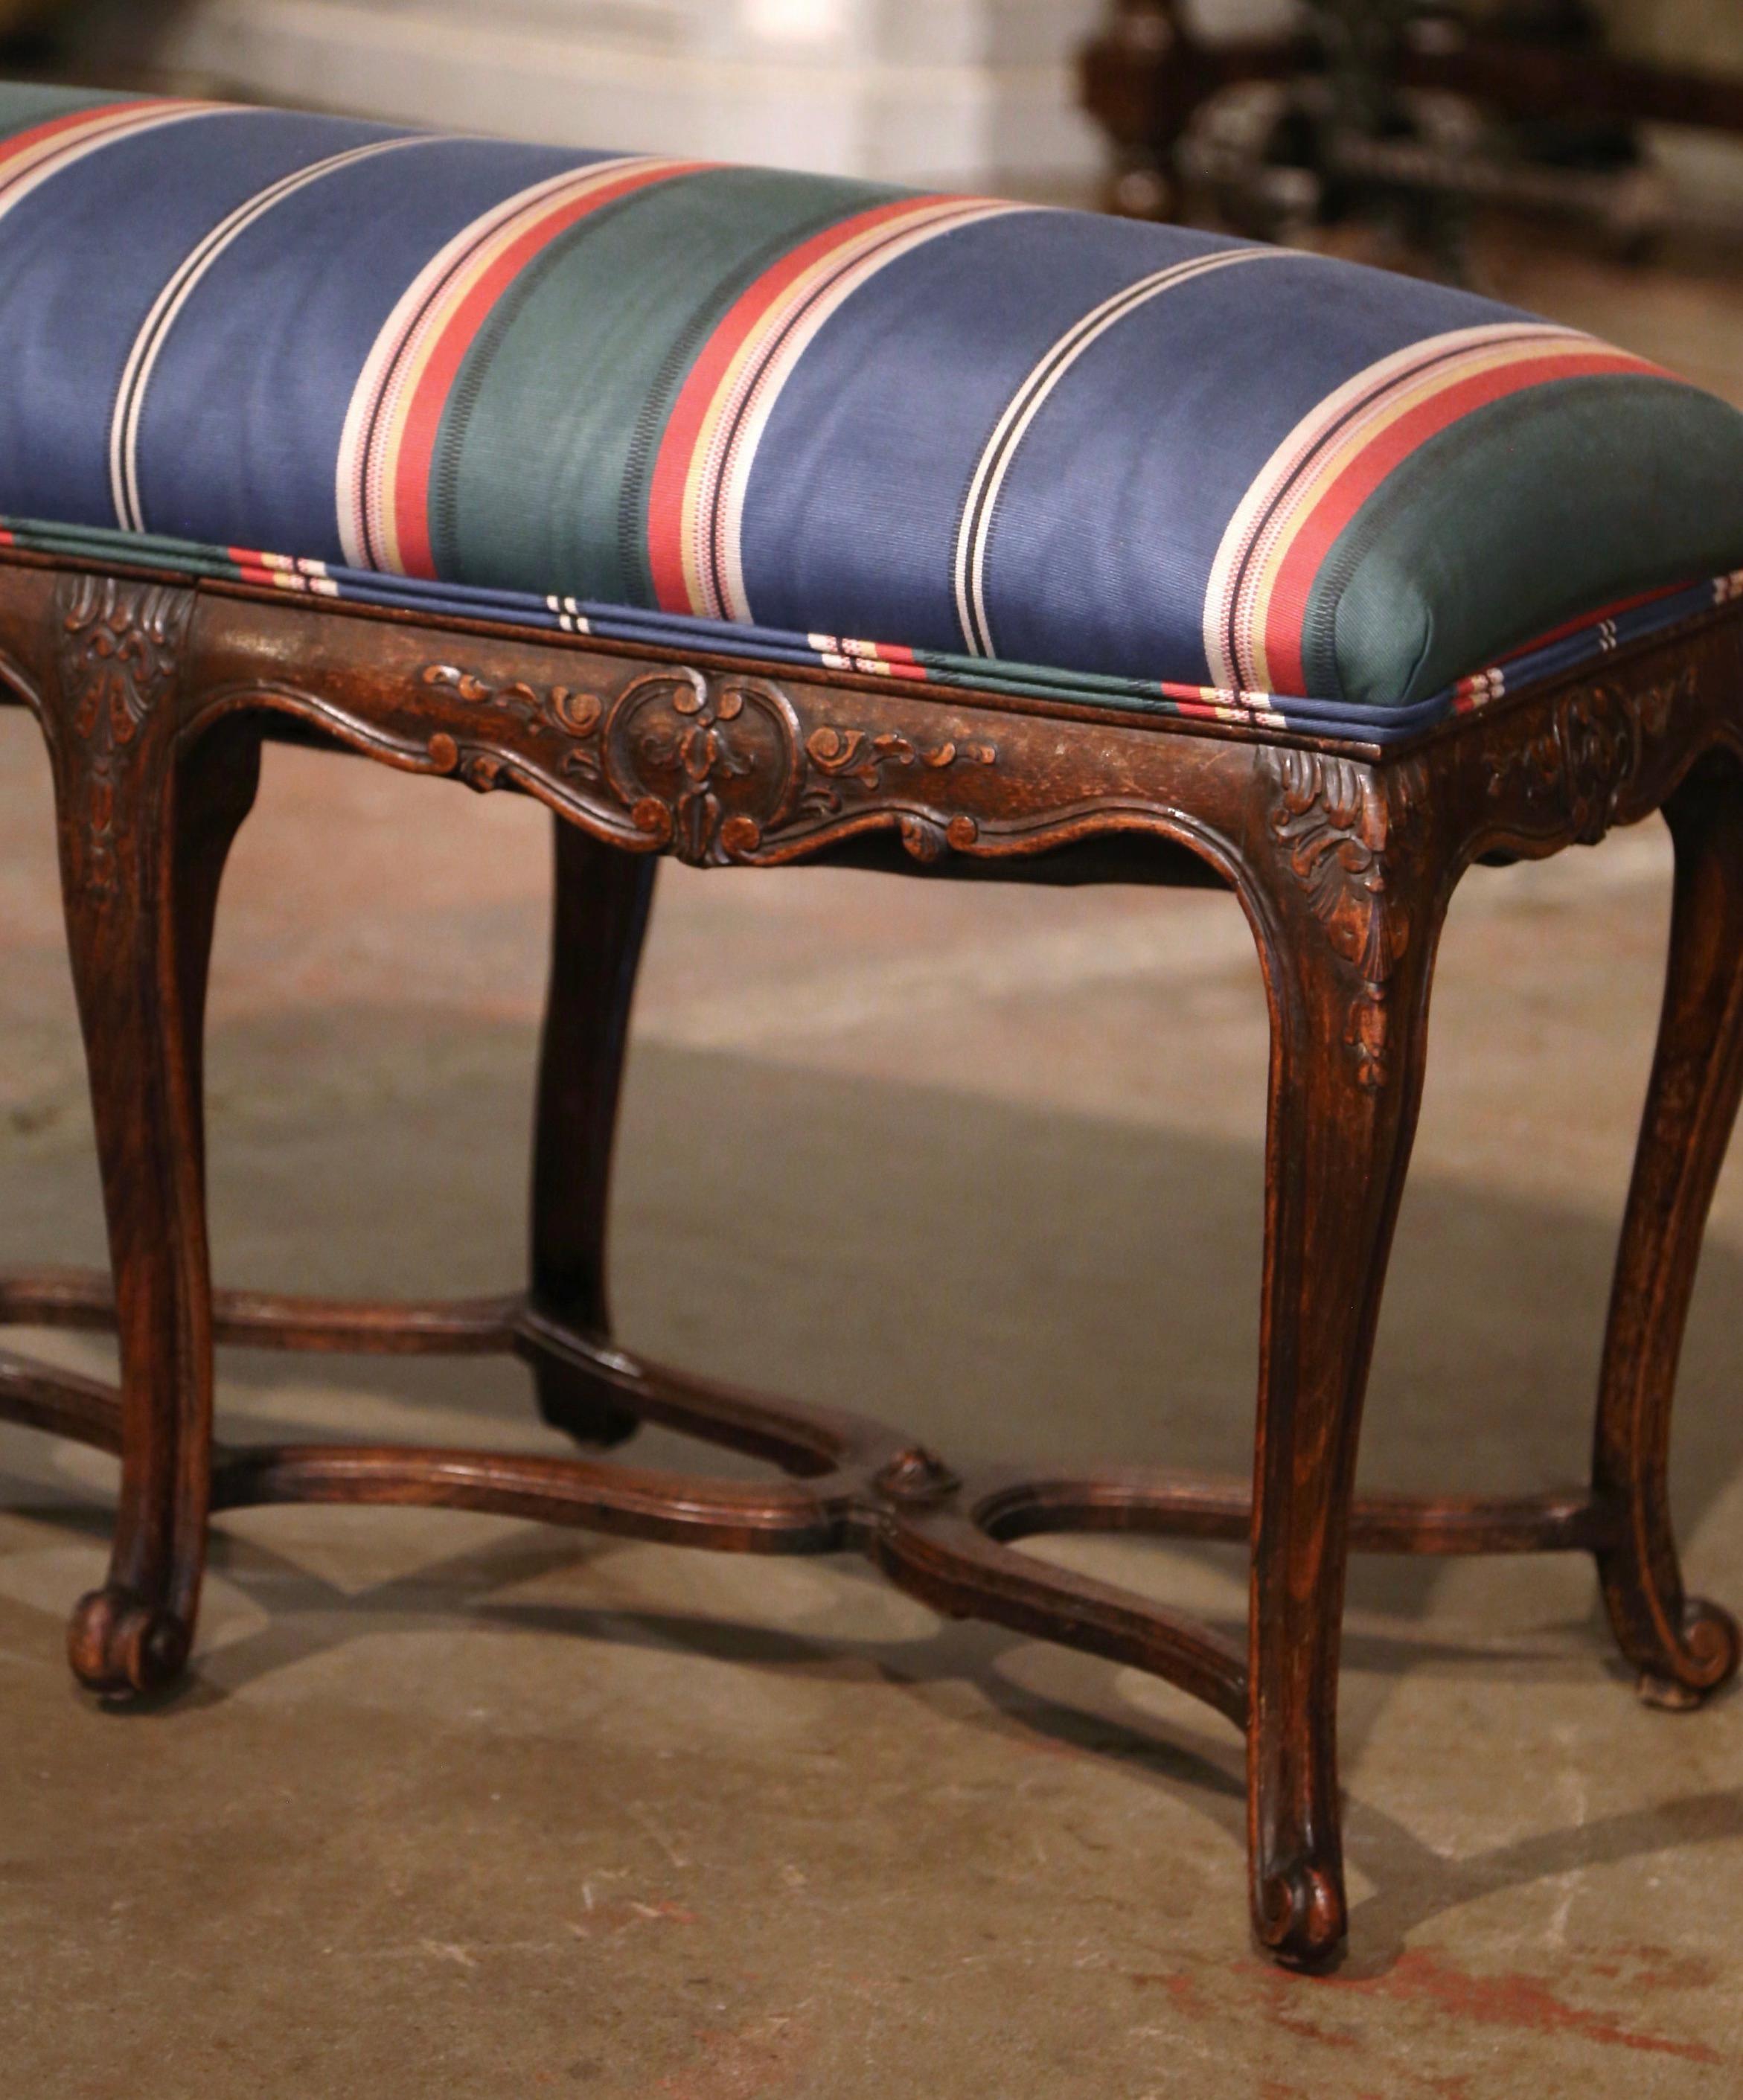 Early 20th Century French Louis XV Carved Walnut Six-Leg Upholstered Bench  In Excellent Condition For Sale In Dallas, TX